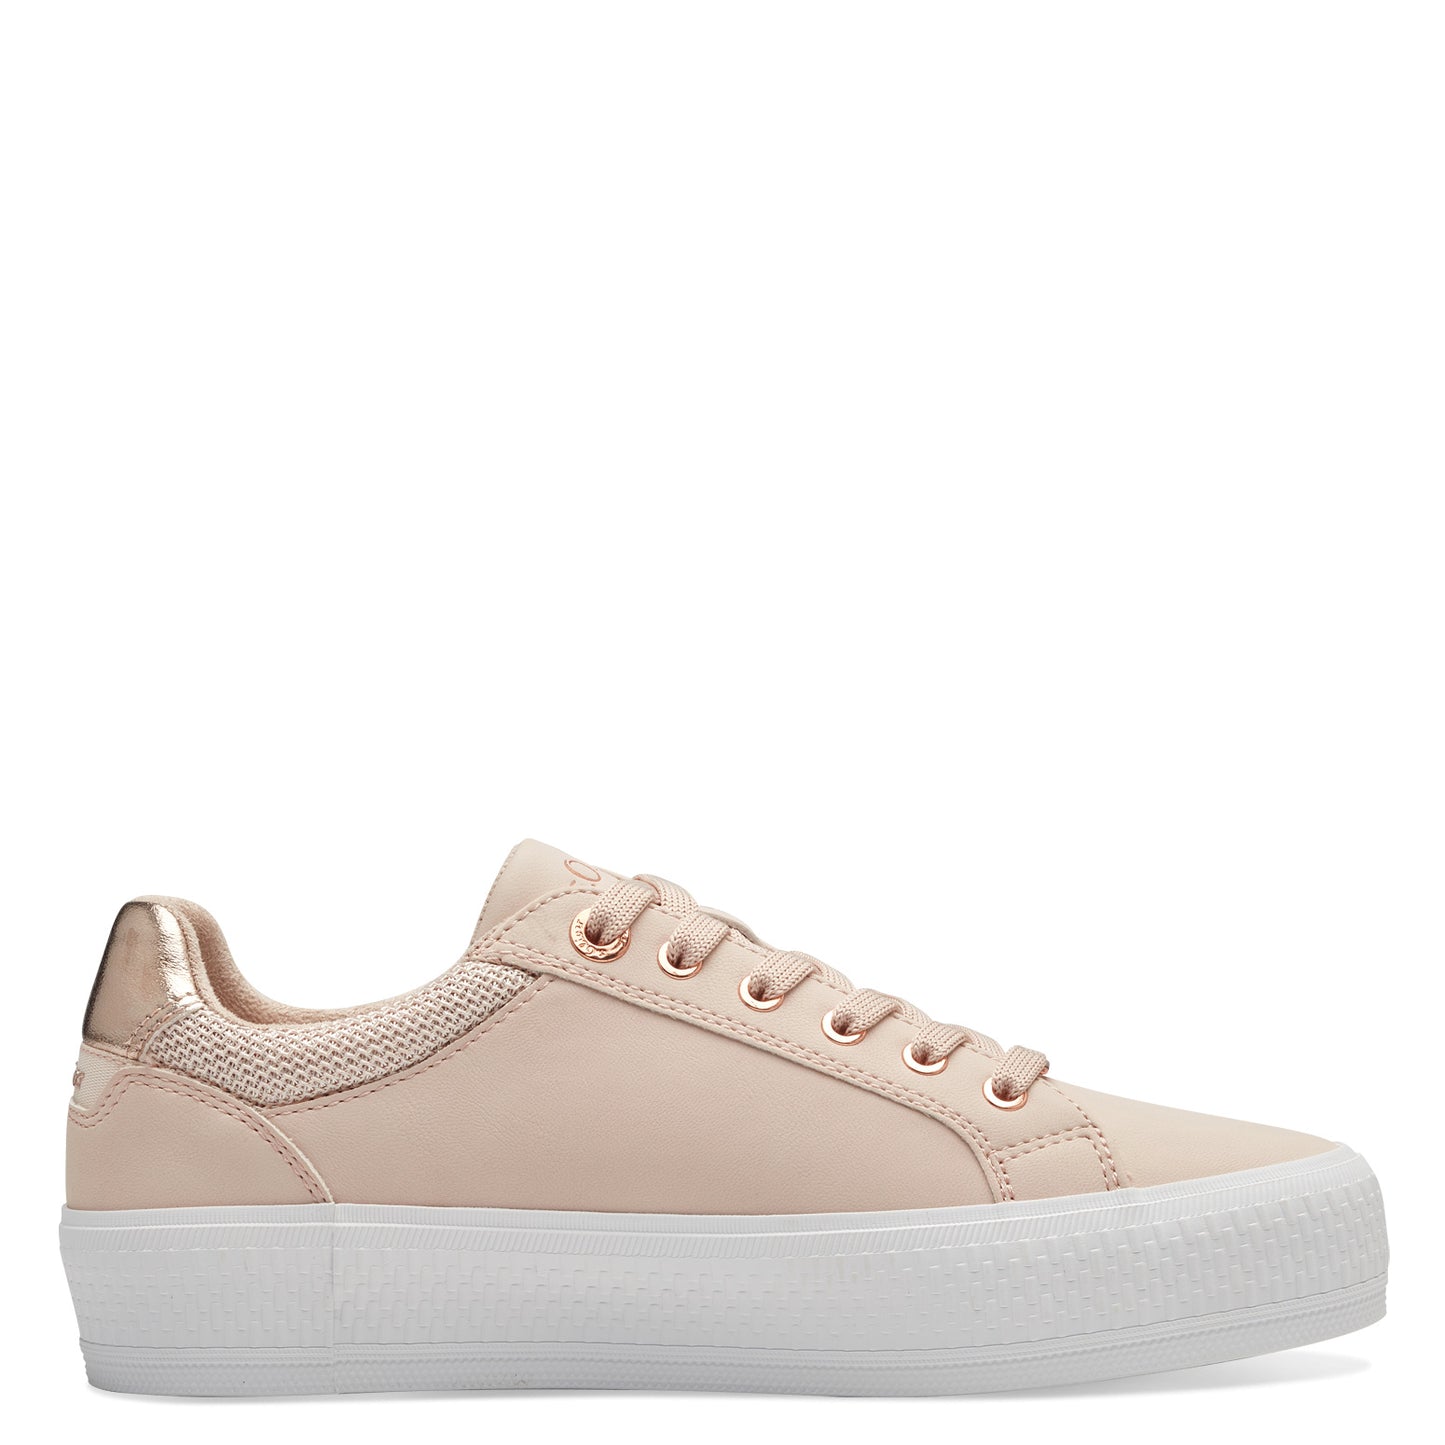 S.oliver - Ladies Shoes Trainers Rose (2220)